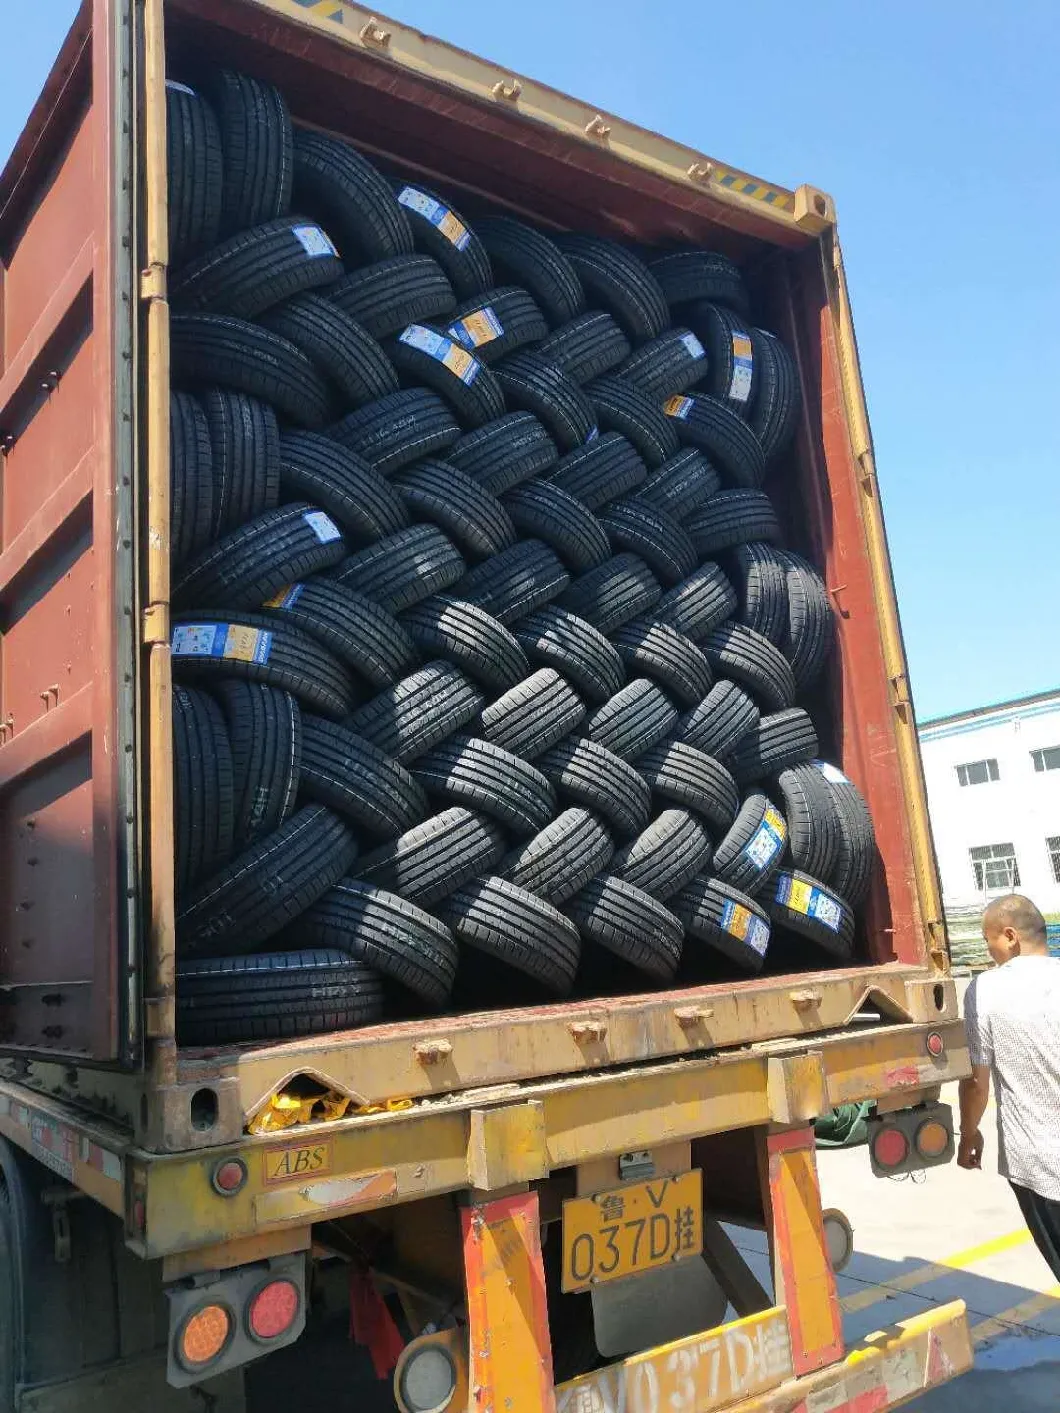 Winter Tyres for Sale Kapsen Habilead Brand 205/60r16 205/55r16 215/55r16 with Best Quality and Price